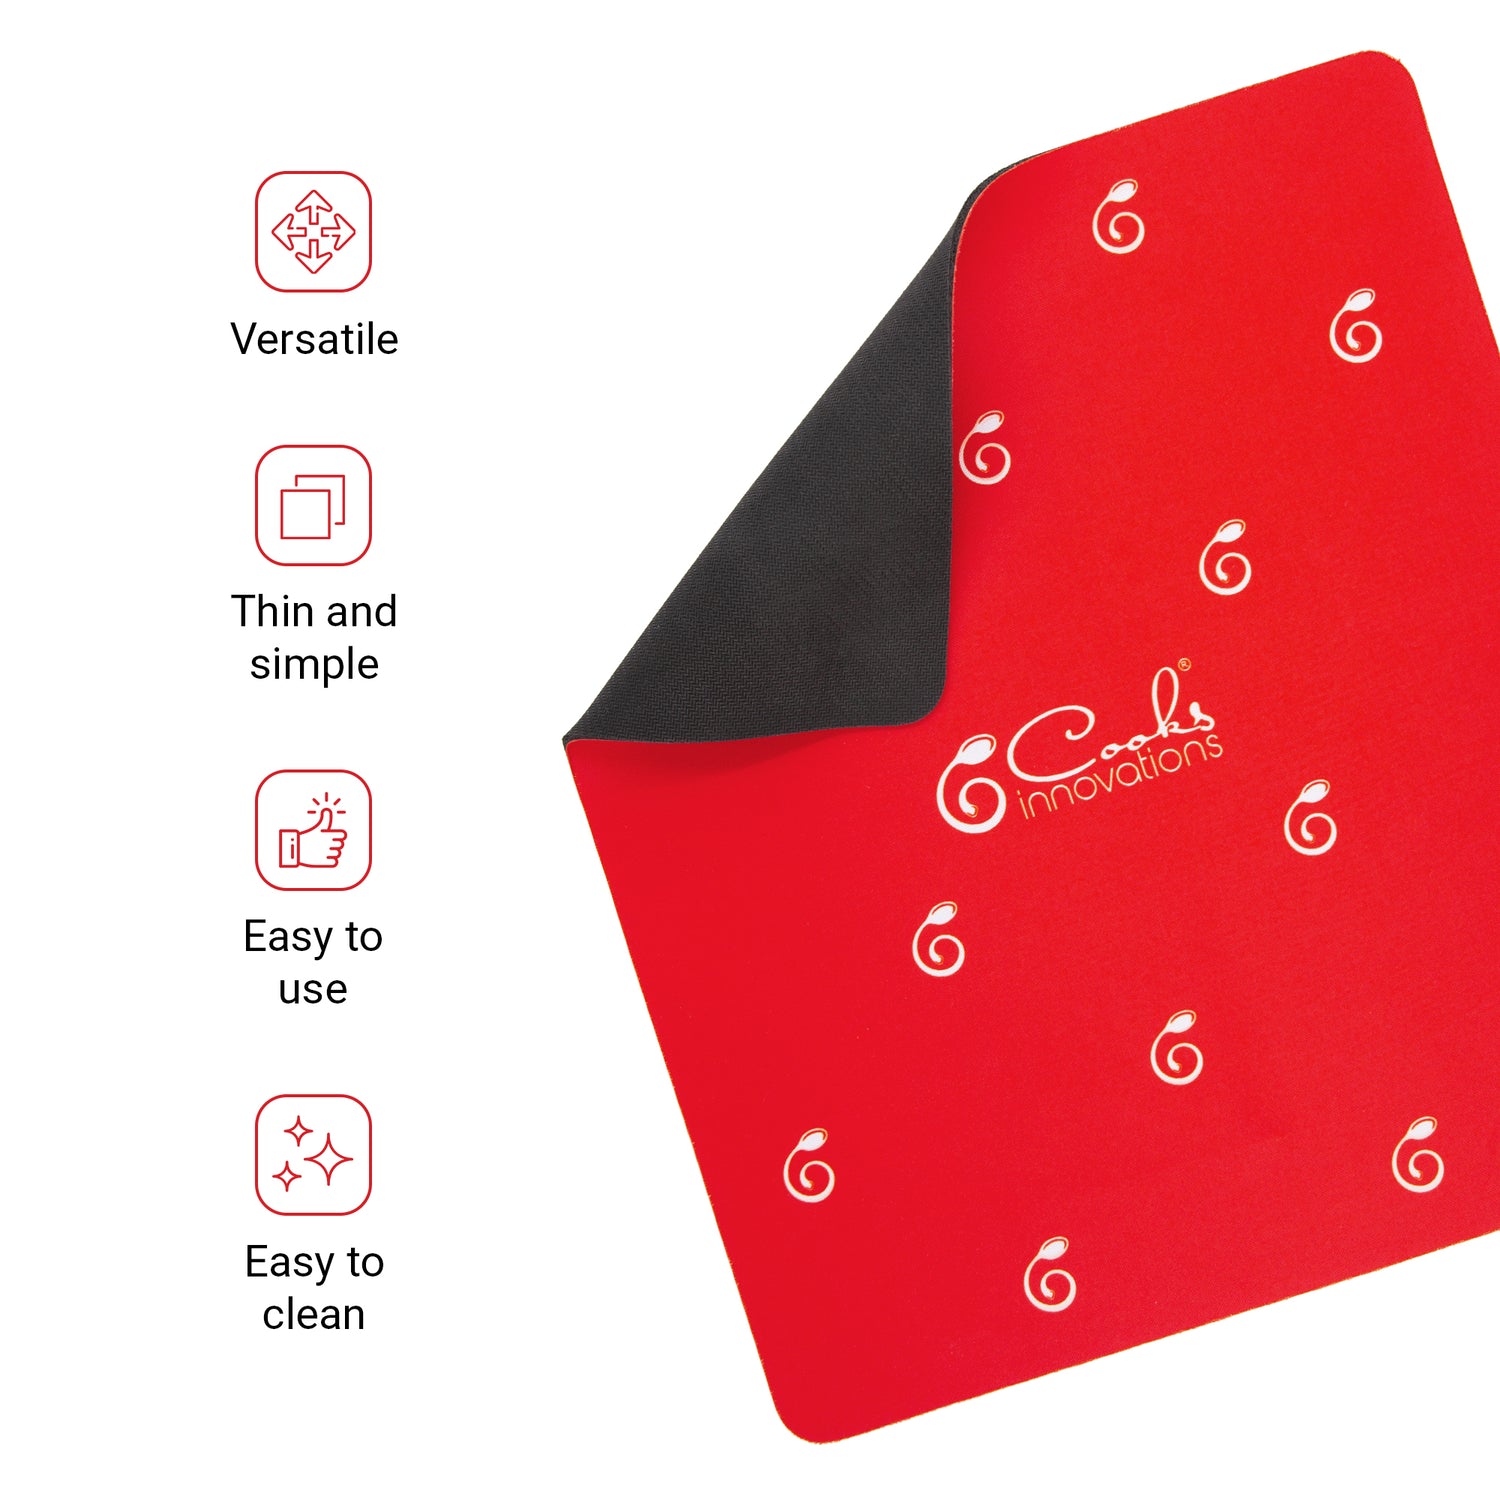 Cooks Innovations the Original Glide Mat - Easily Moving the Small Cou